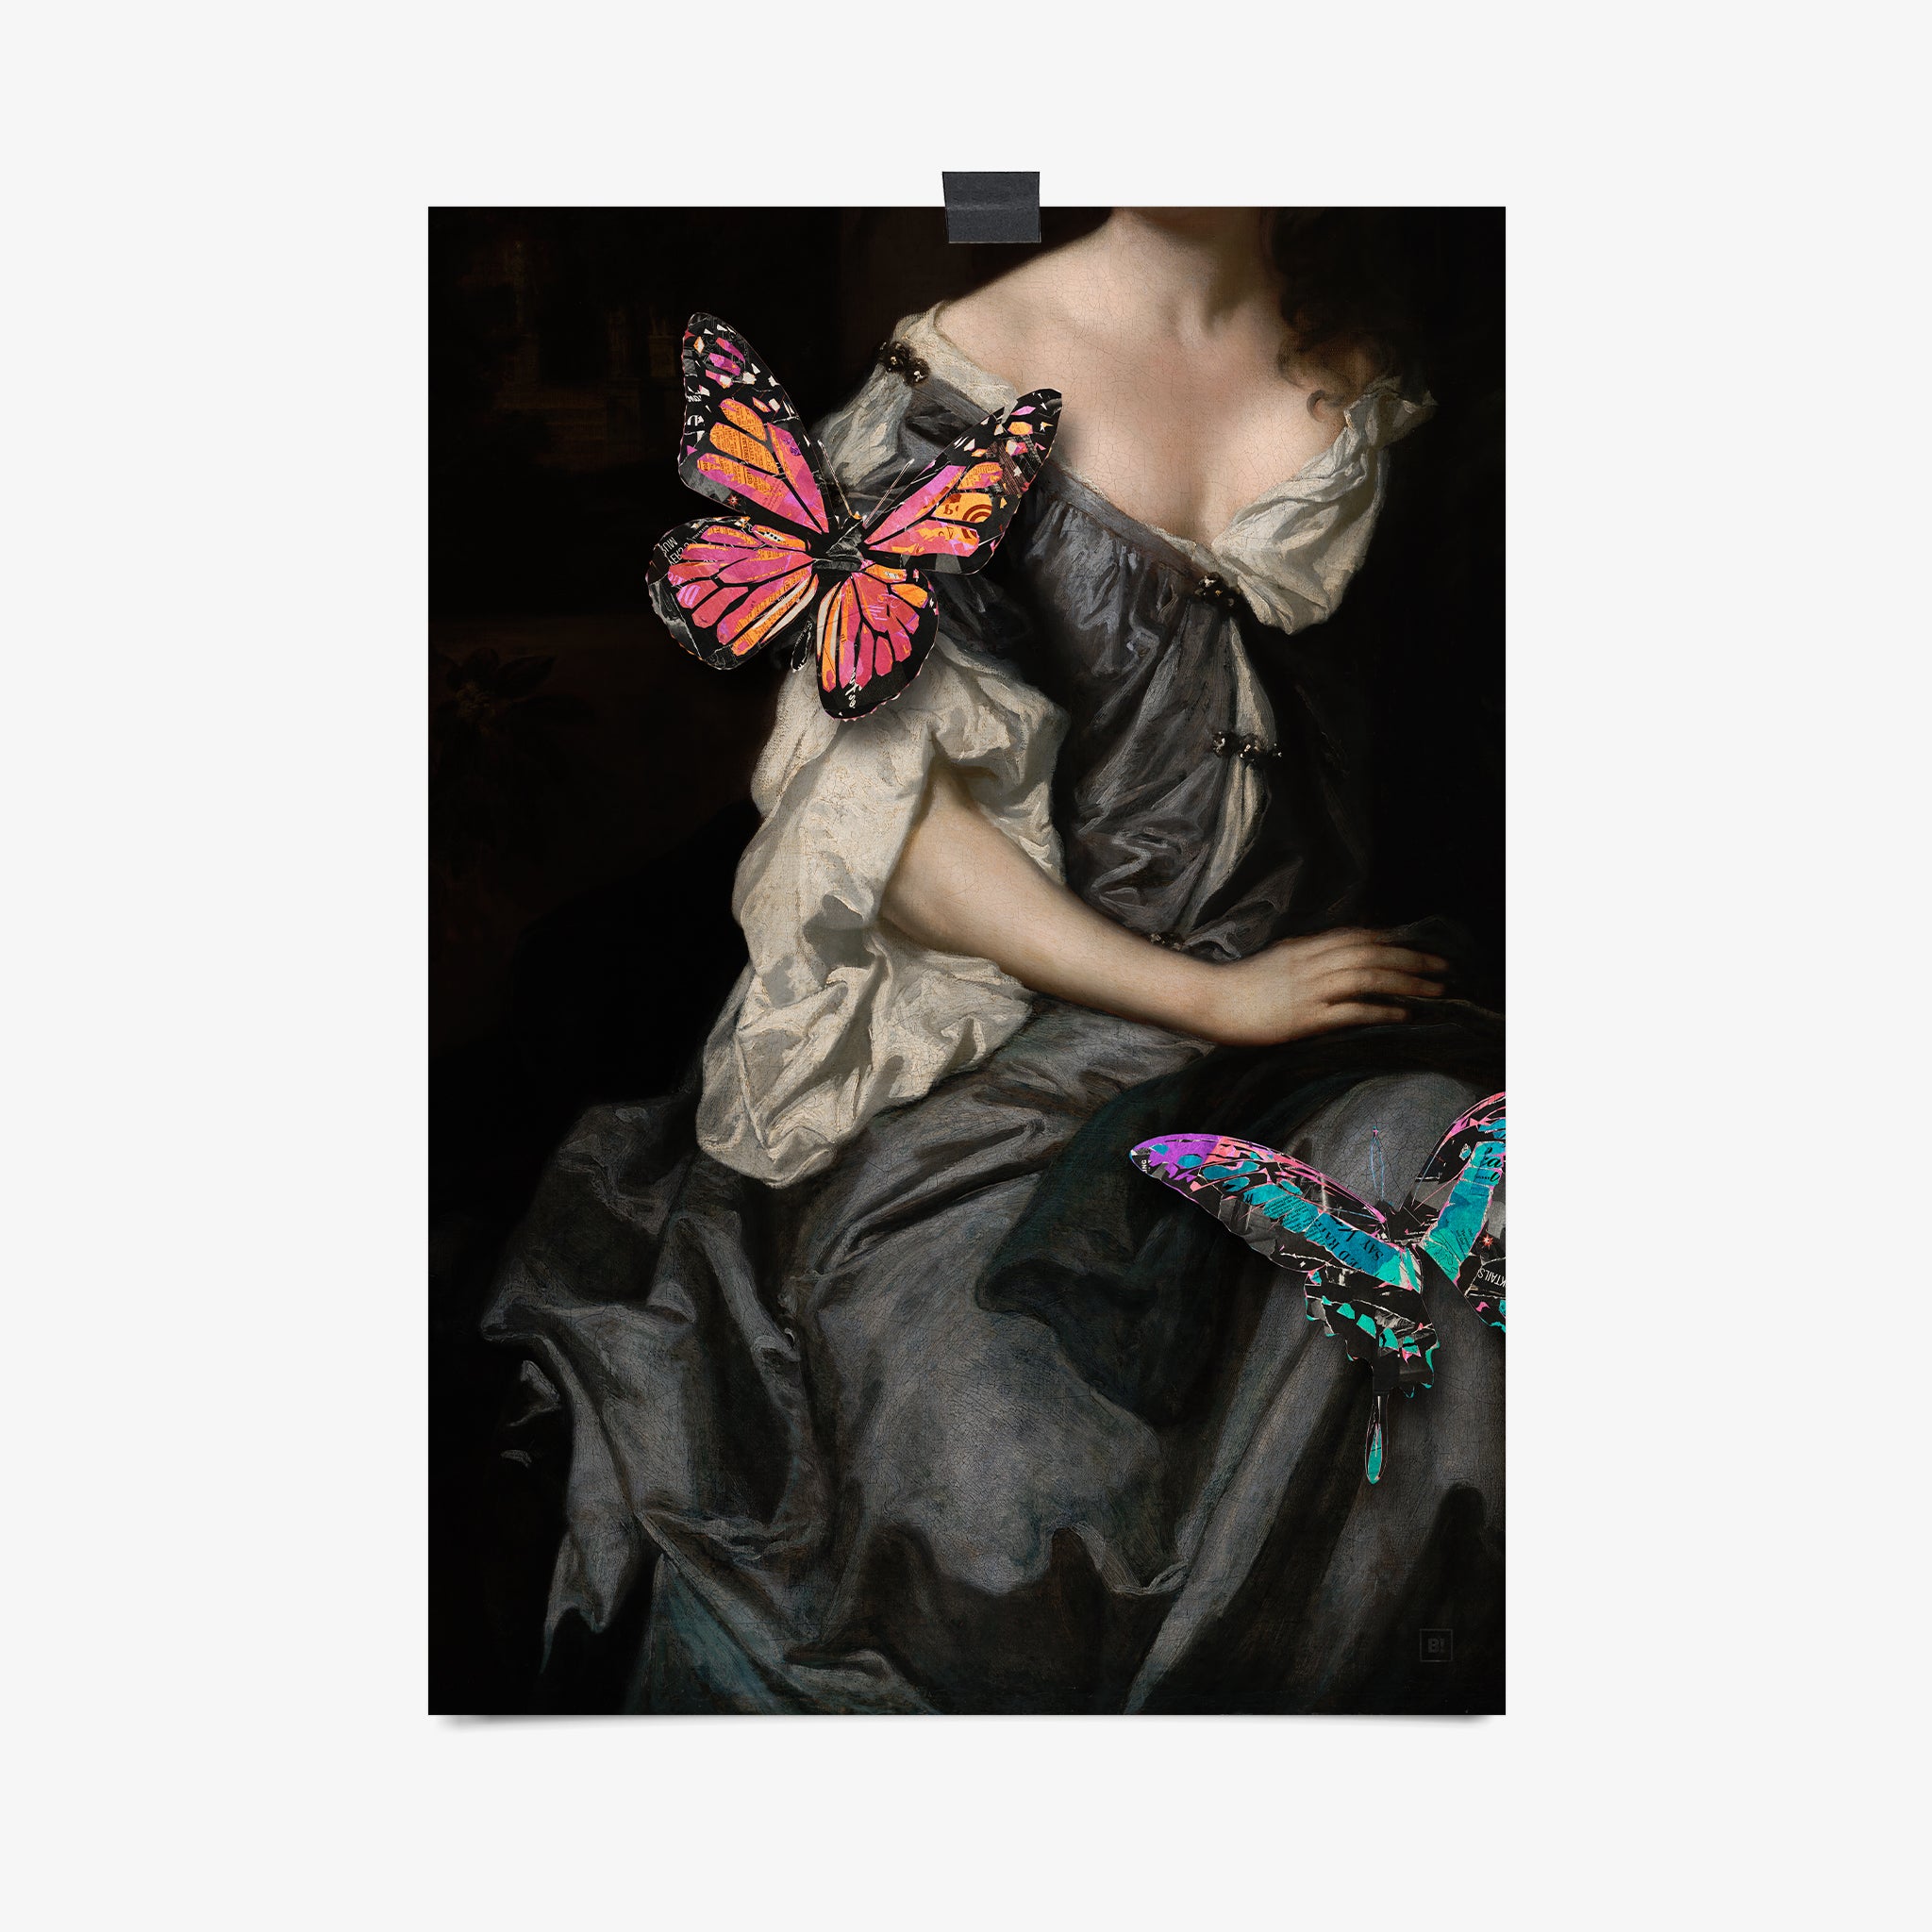 Be inspired by our Victorian portrait with gray dress and butterflies art print. This artwork was printed using the giclée process on archival acid-free paper that captures its timeless beauty in every detail.